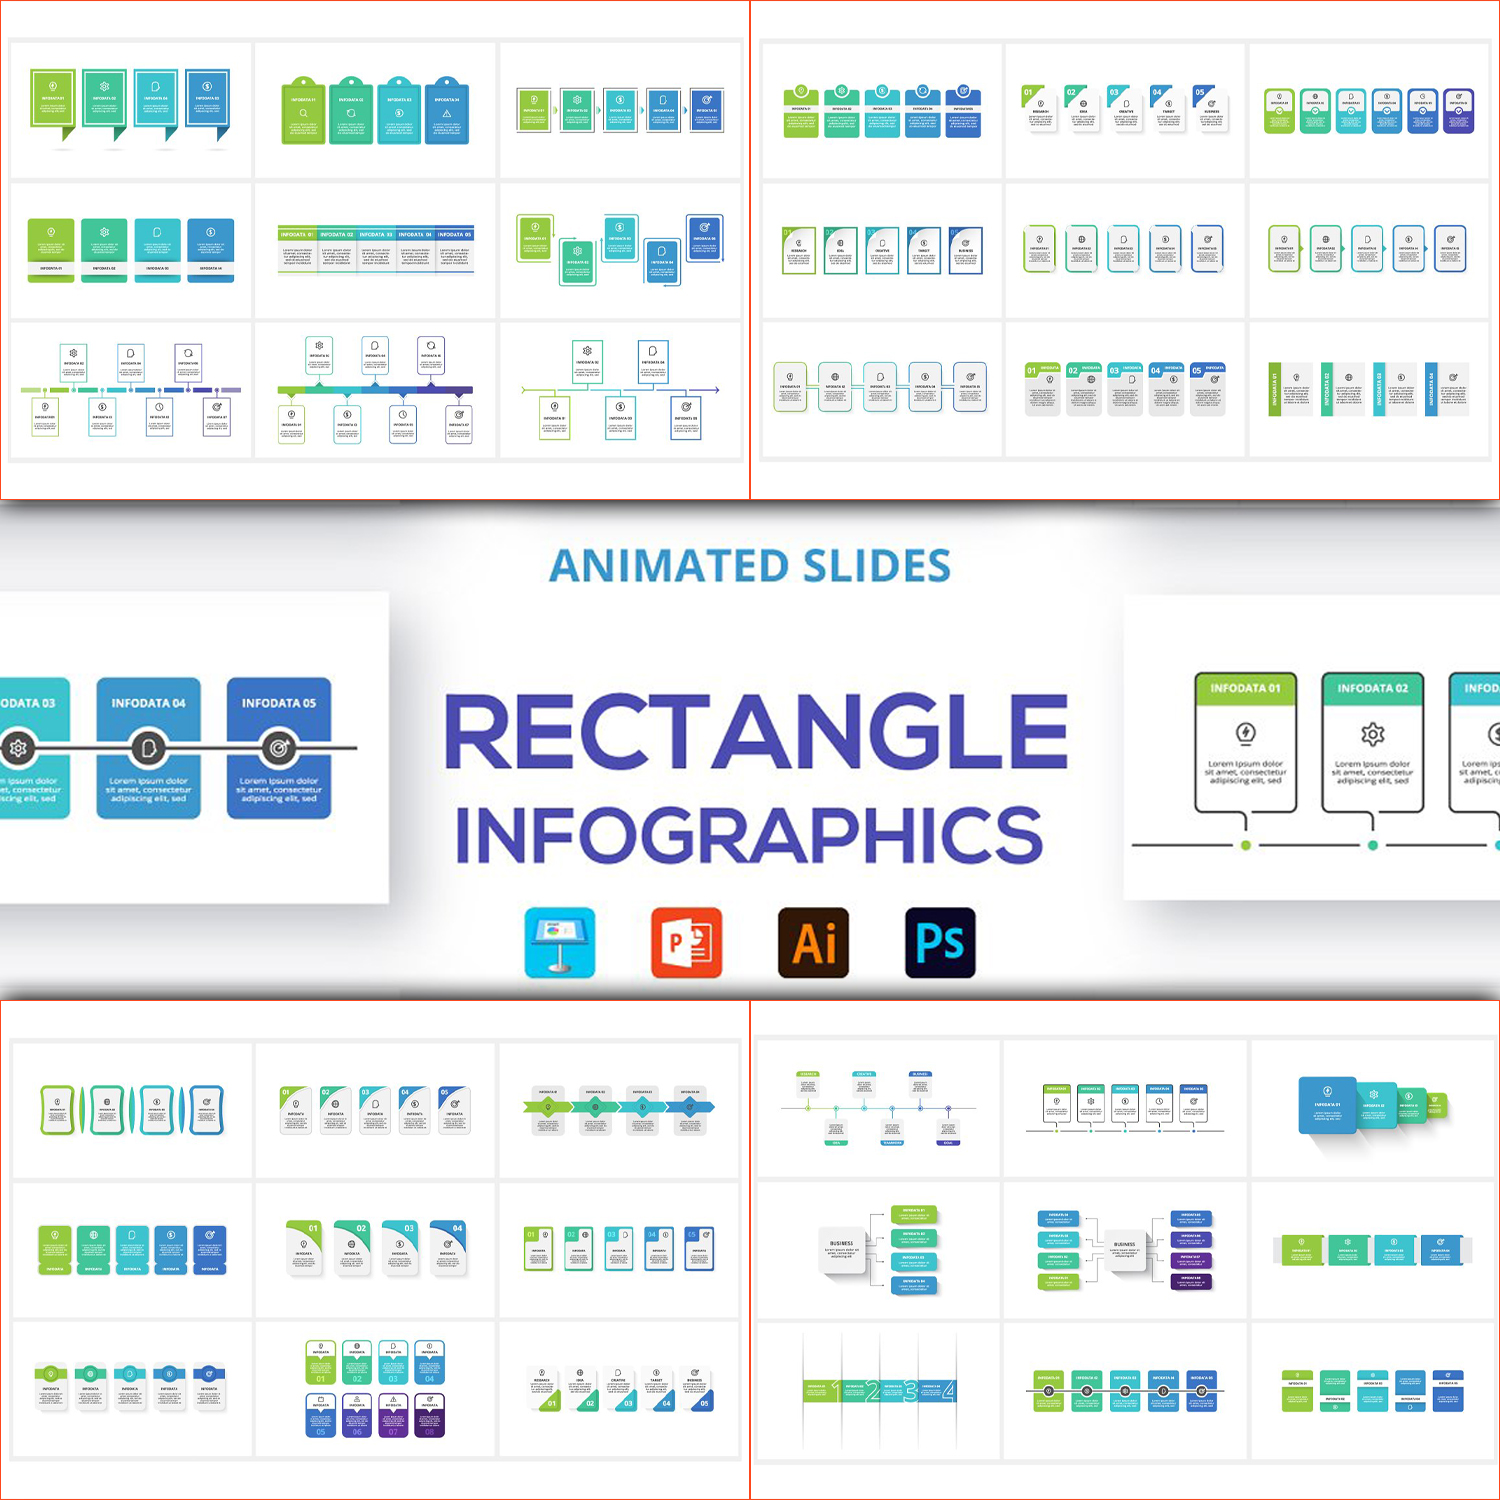 Rectangles animated infographics preview.